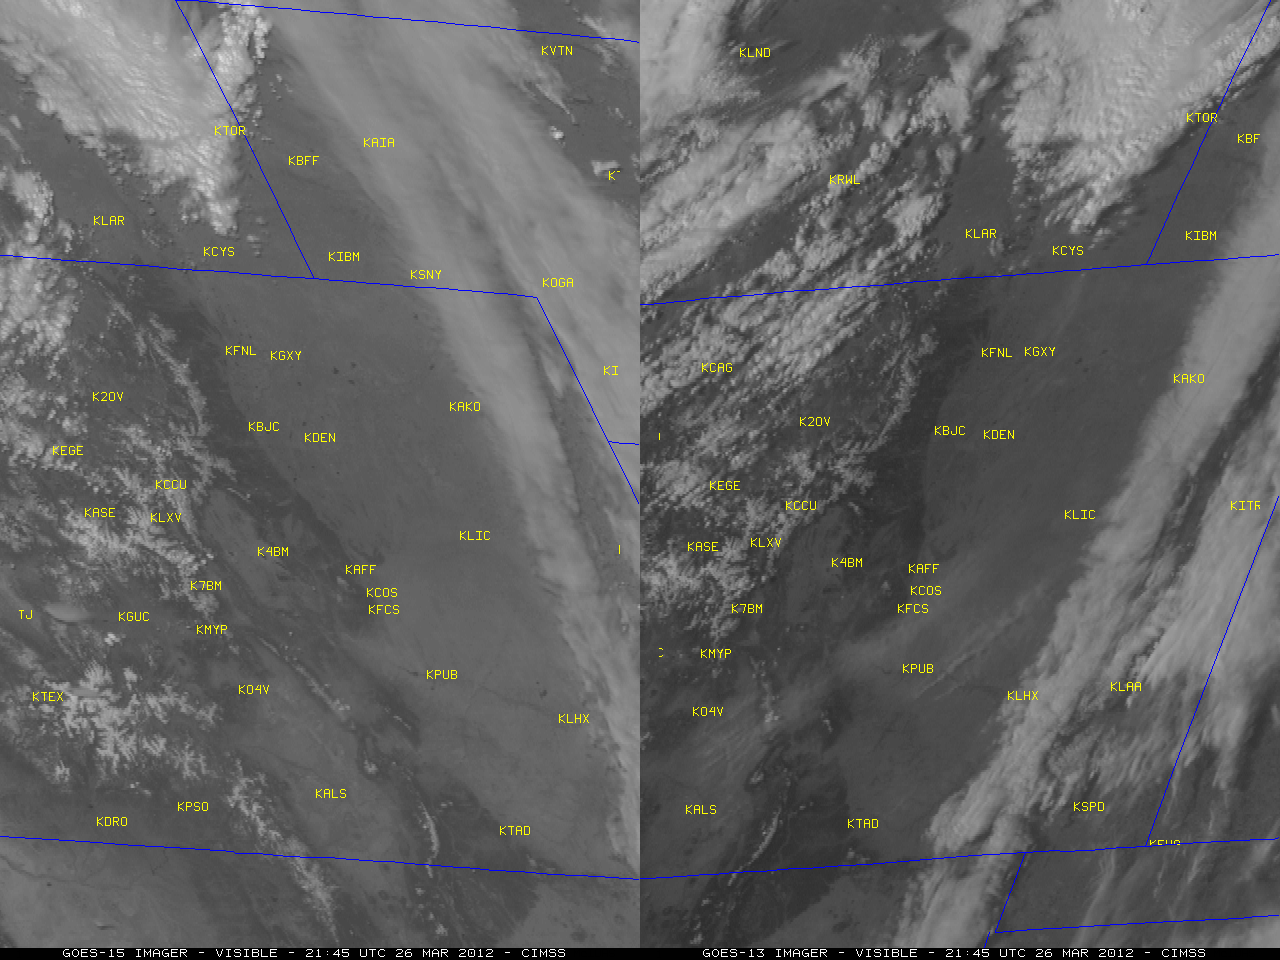 GOES-15 + GOES-13 0.63 Âµm visible channel images